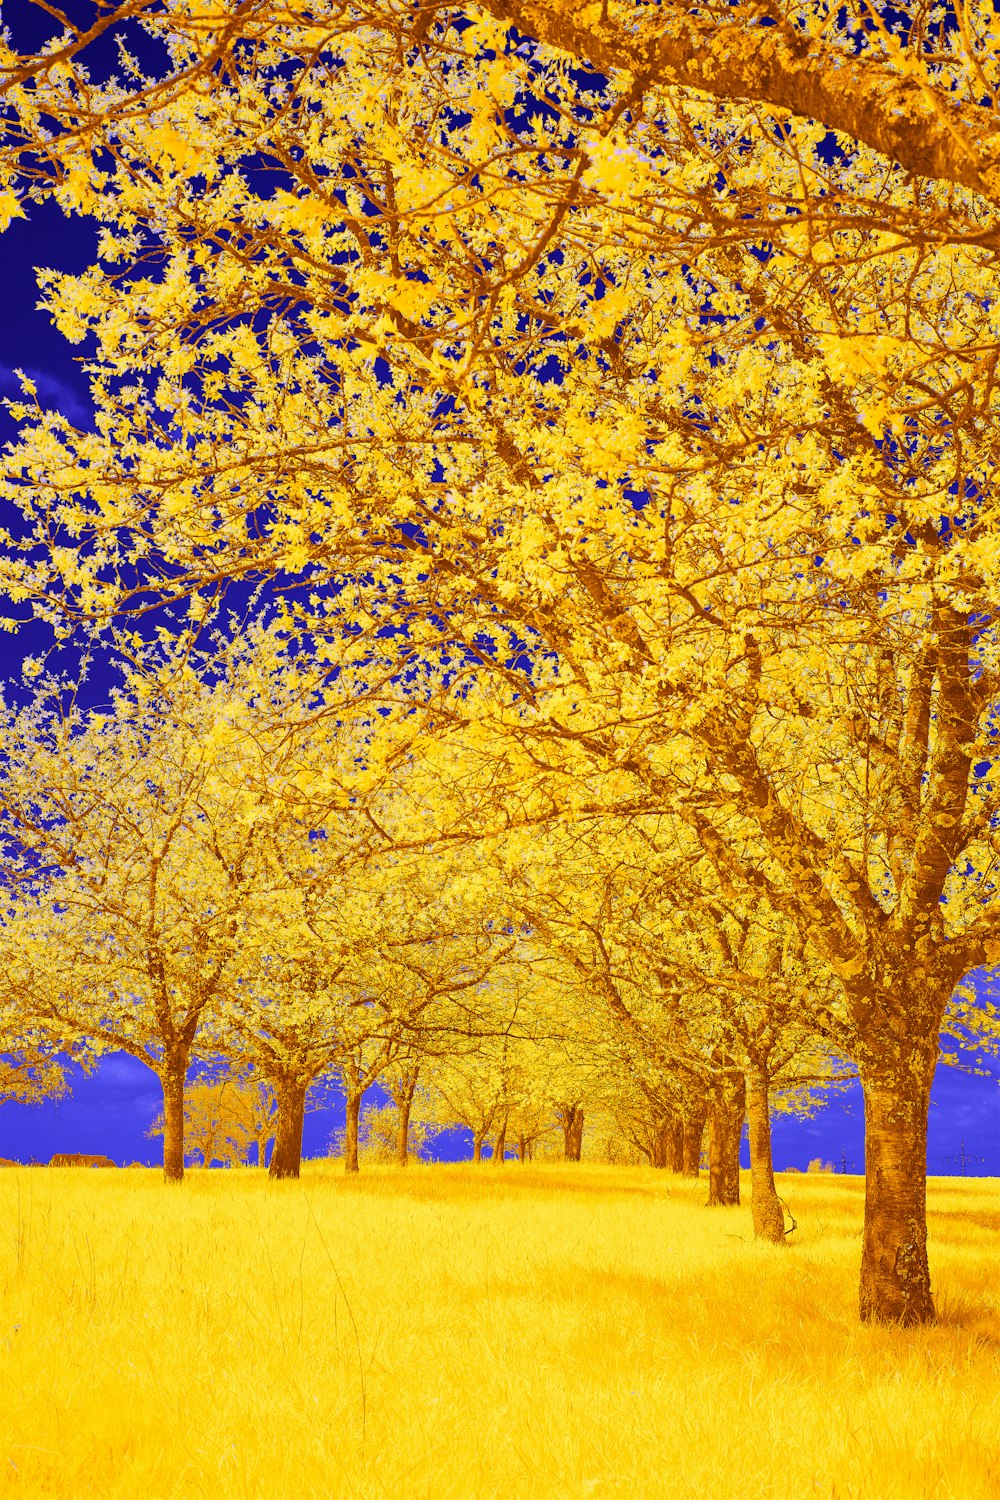 a row of trees with yellow leaves on them